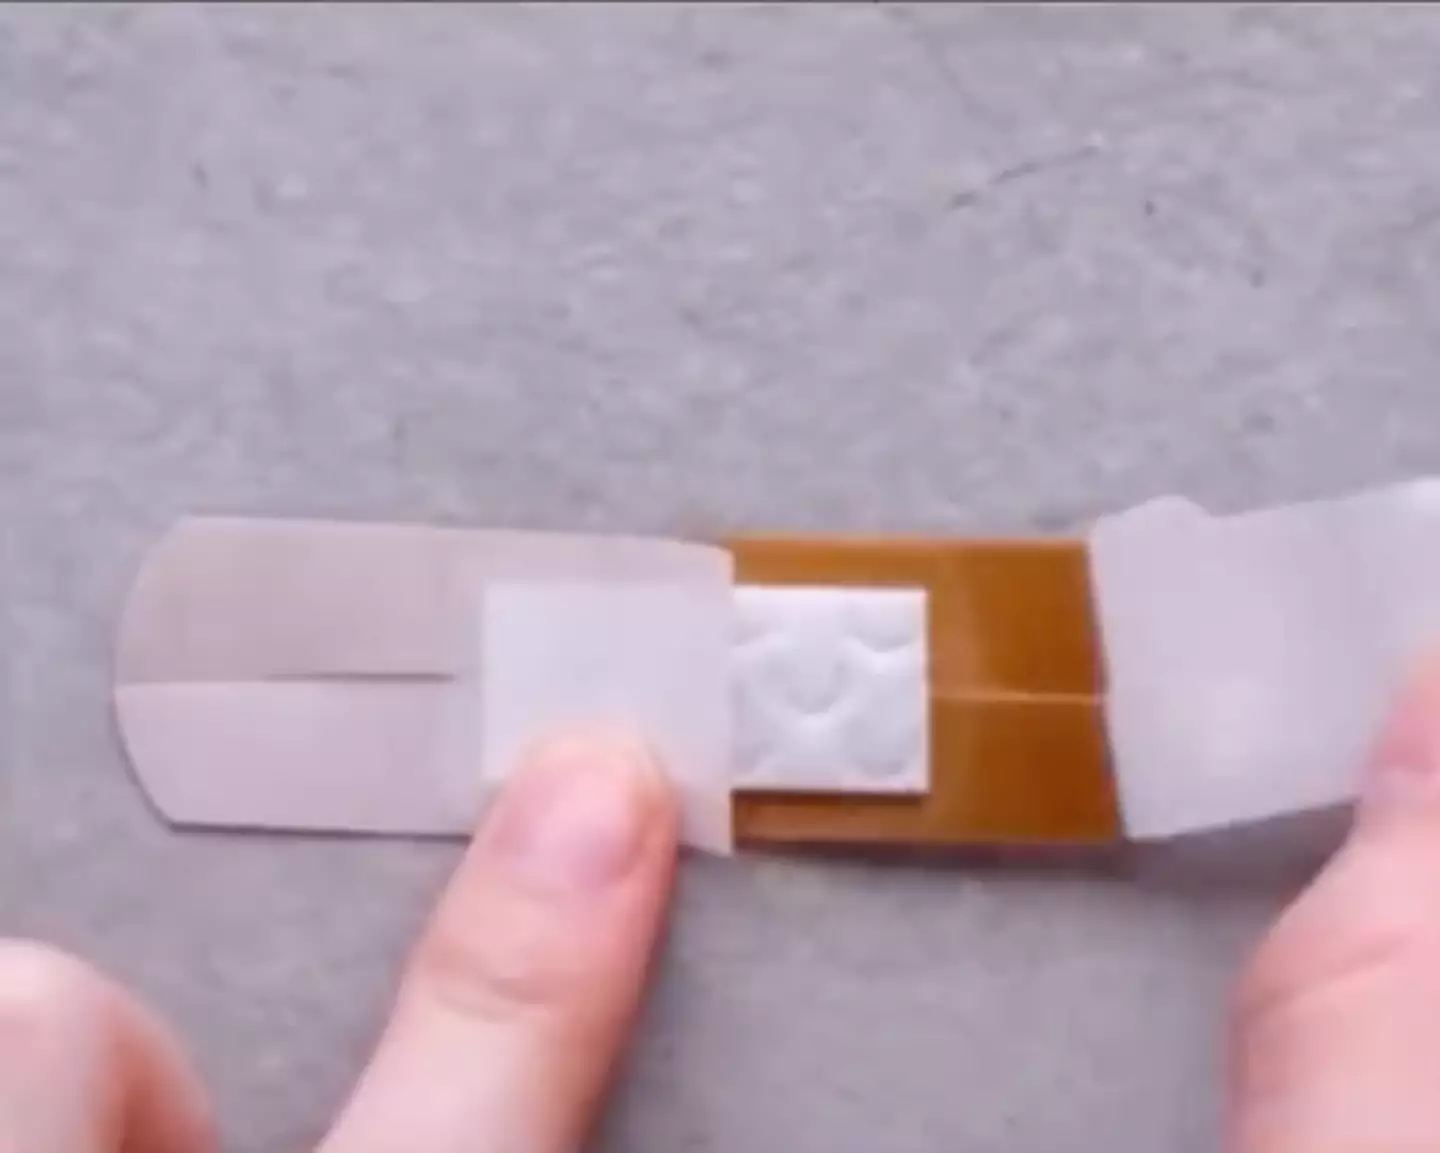 Cutting the plasters at the end helps keep the band-aid in position (